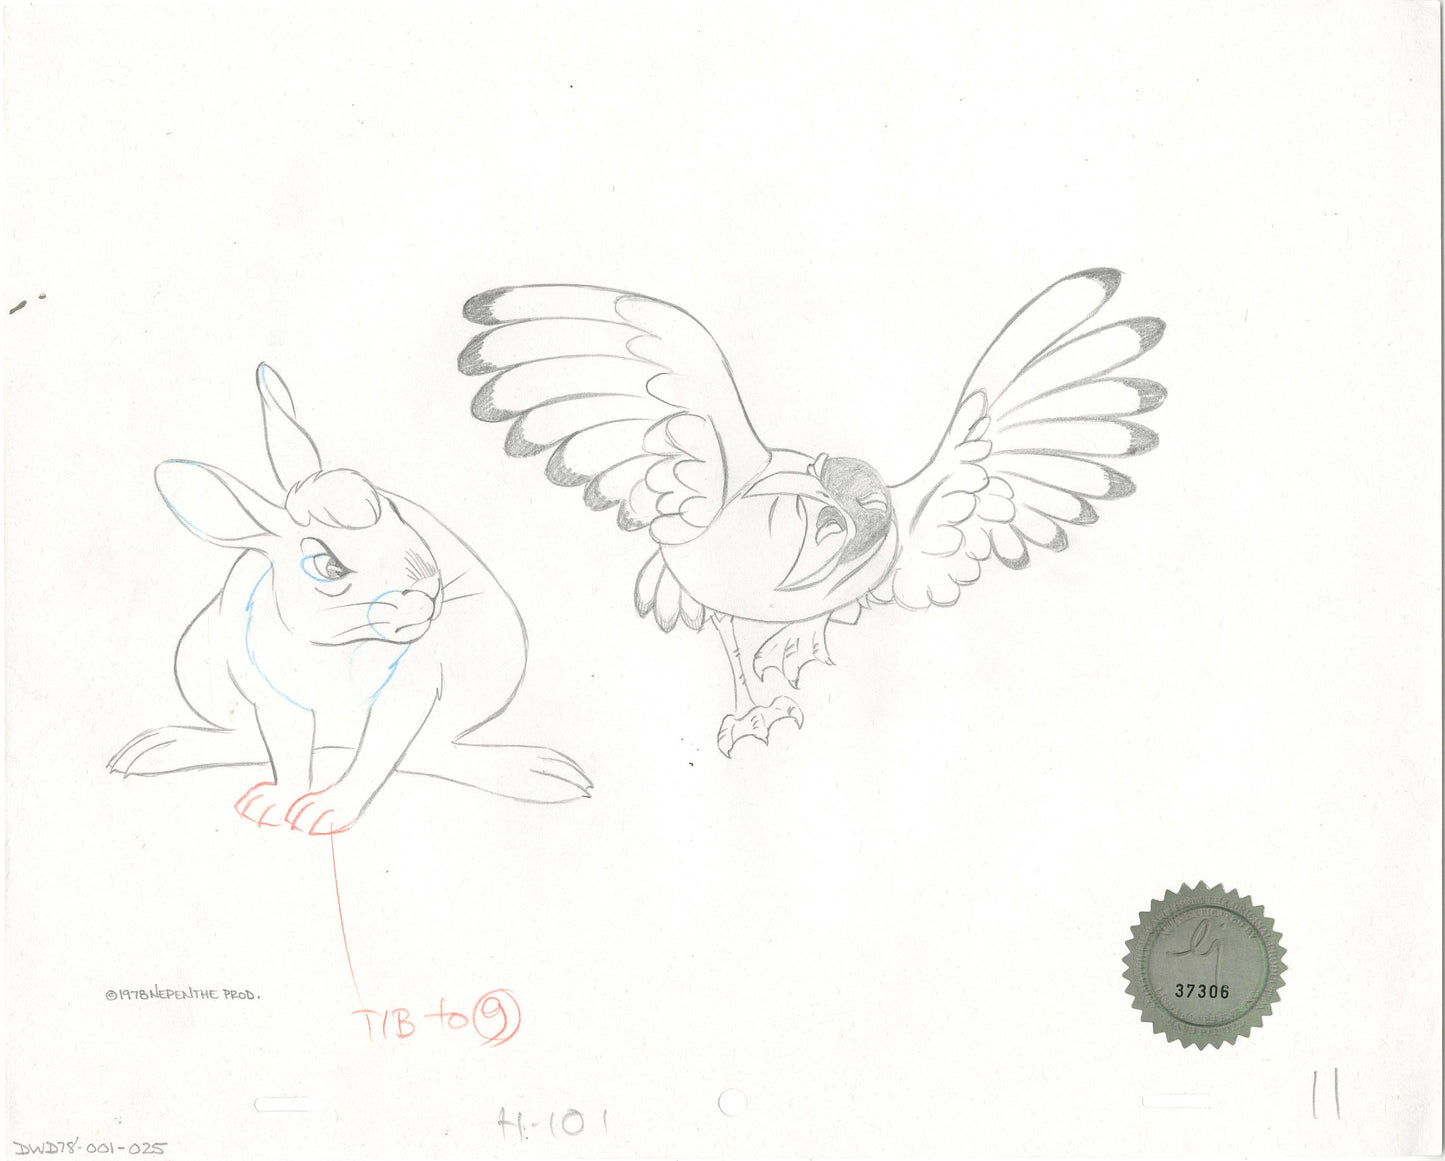 Watership Down 1978 Production Animation Cel Drawing of Bigwig and Kehaar with Linda Jones Seal and Certificate of Authenticity 001-25